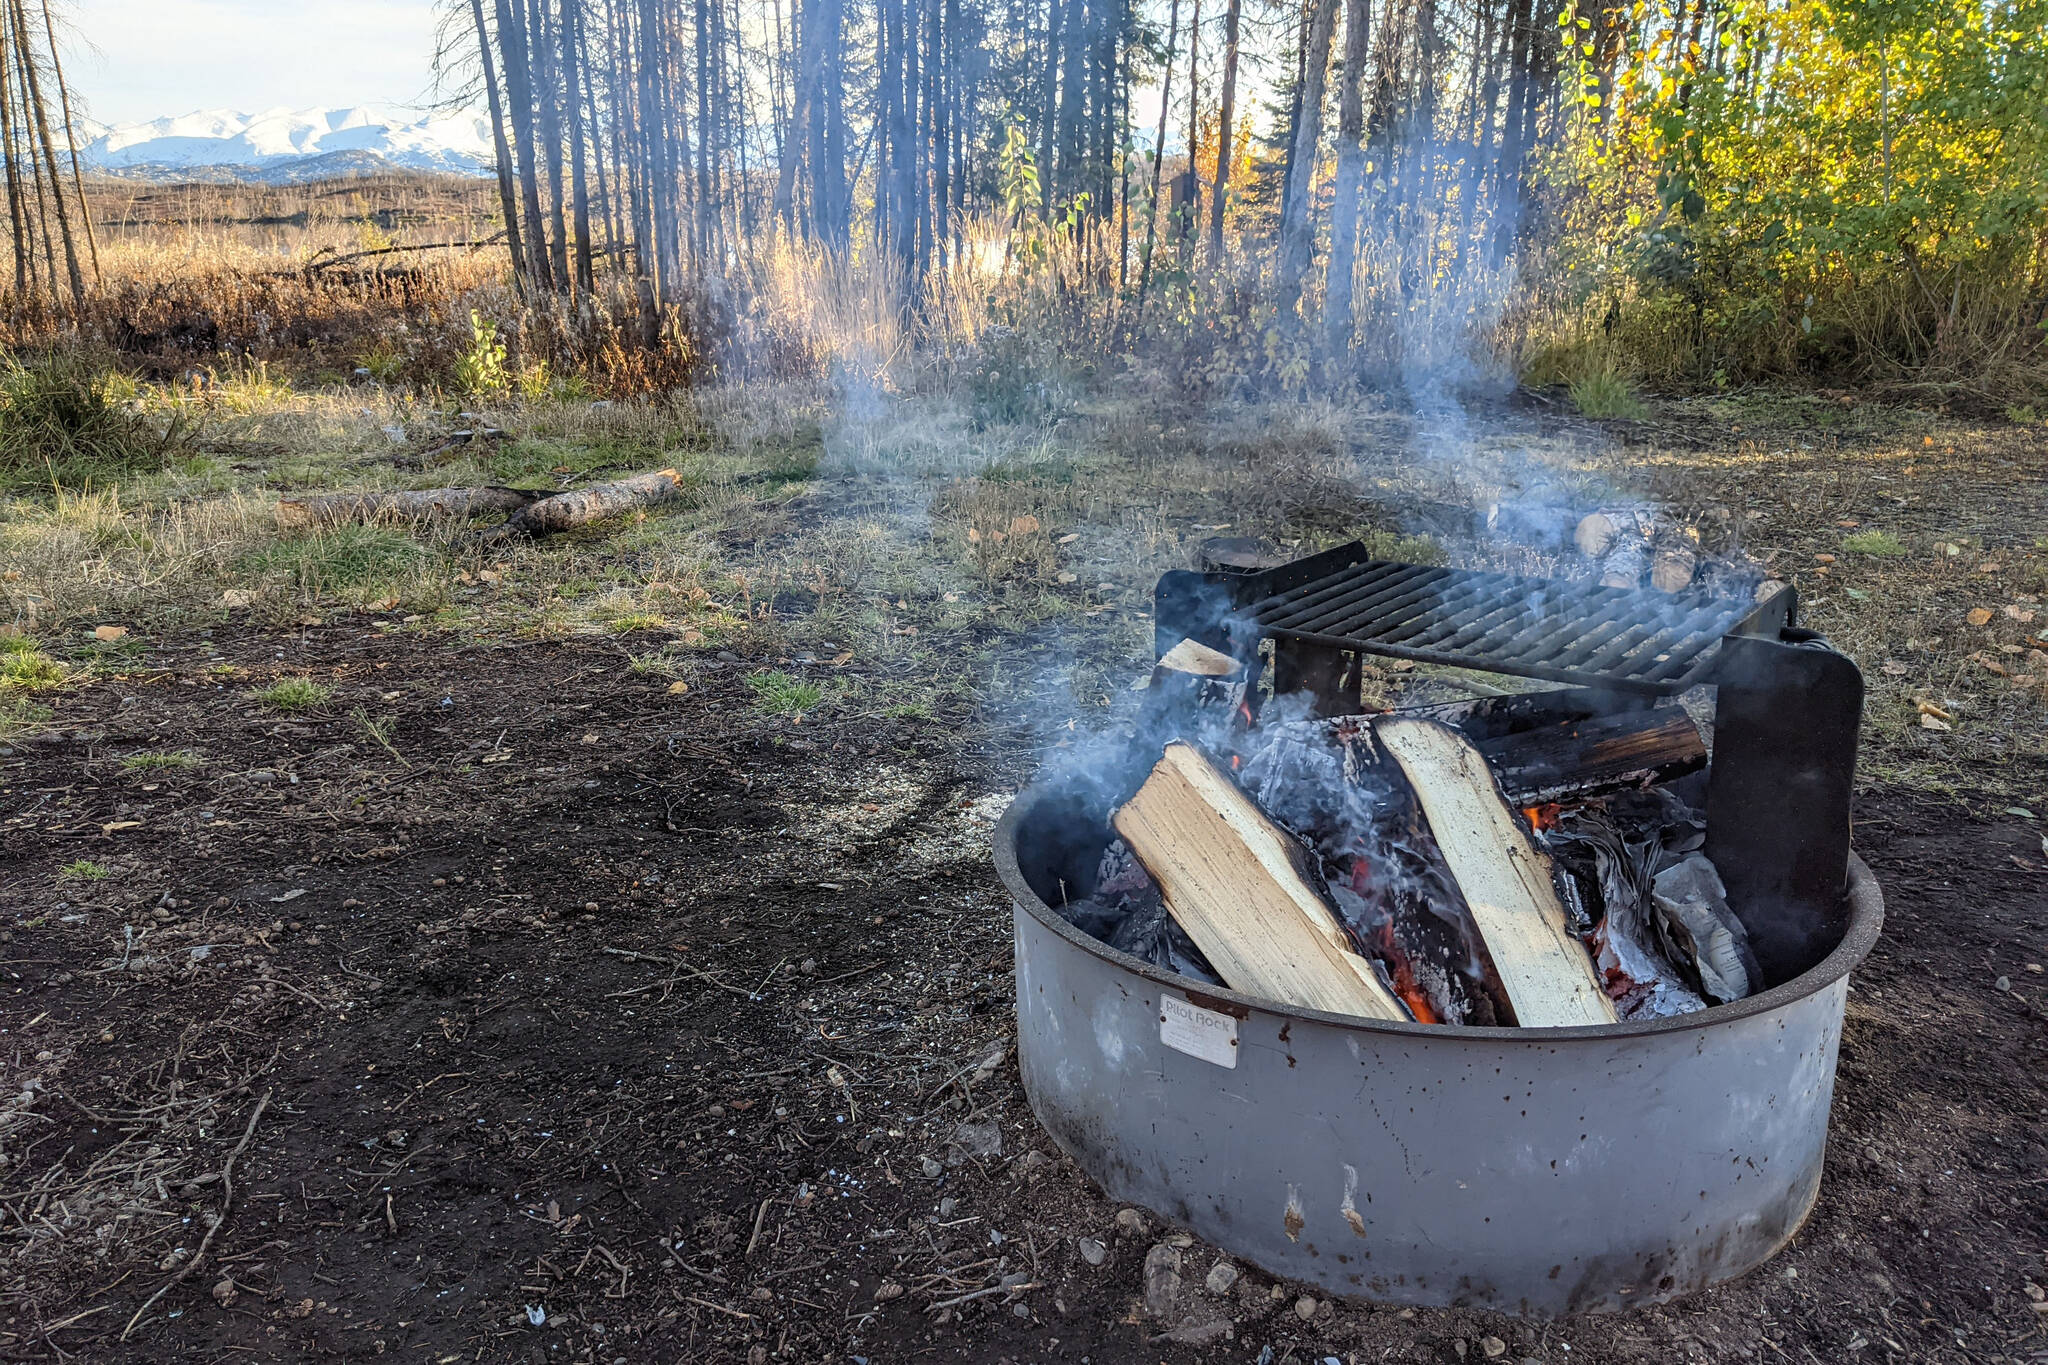 Firewood is burned at a campground at Kelly Lake in the Kenai National Wildlife Refuge in Alaska in September 2021. (Erin Thompson/Peninsula Clarion file)